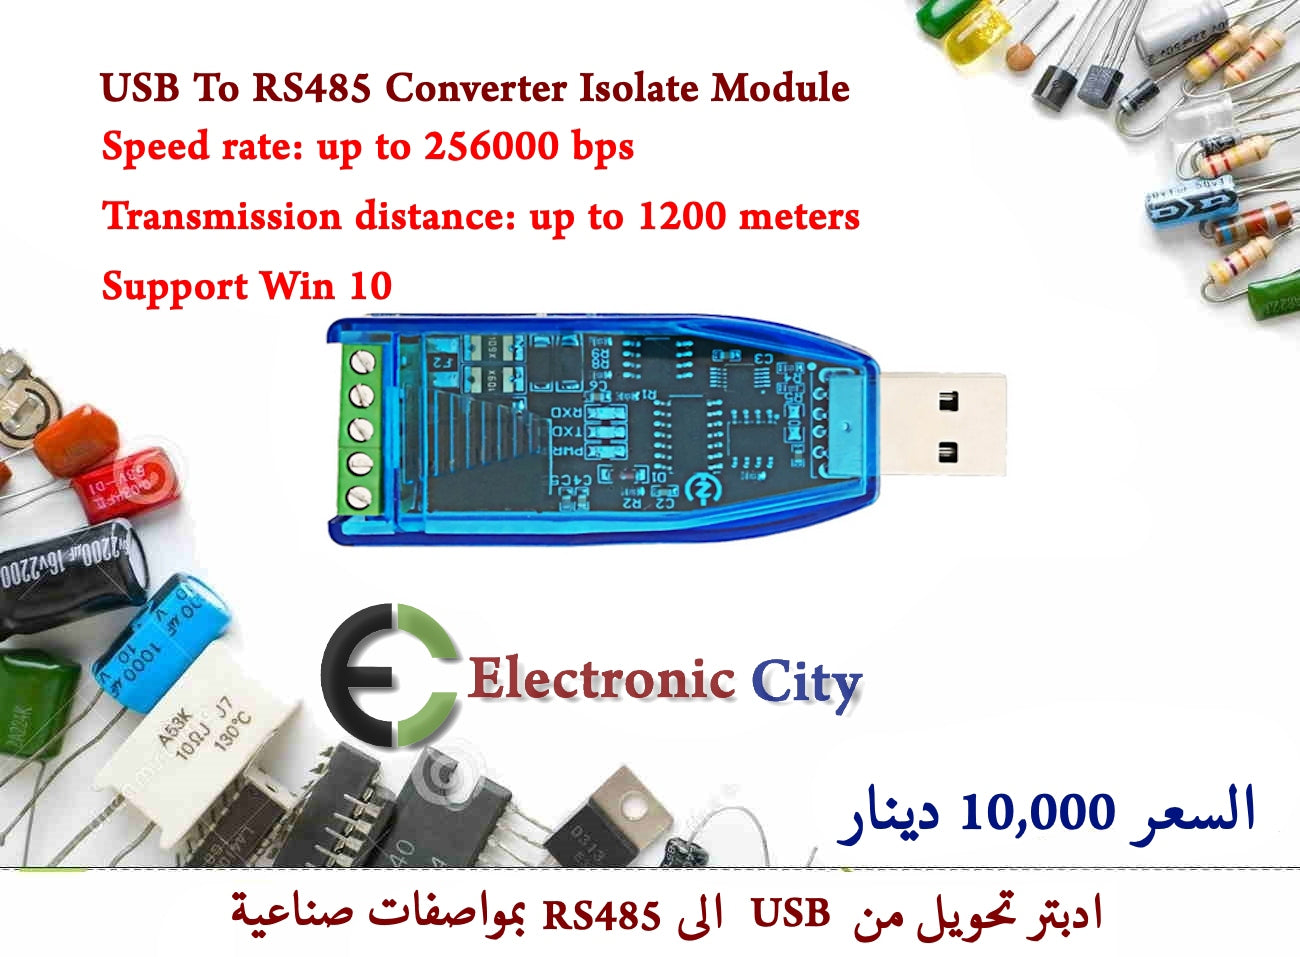 USB To RS485 Converter Isolate Module 12259